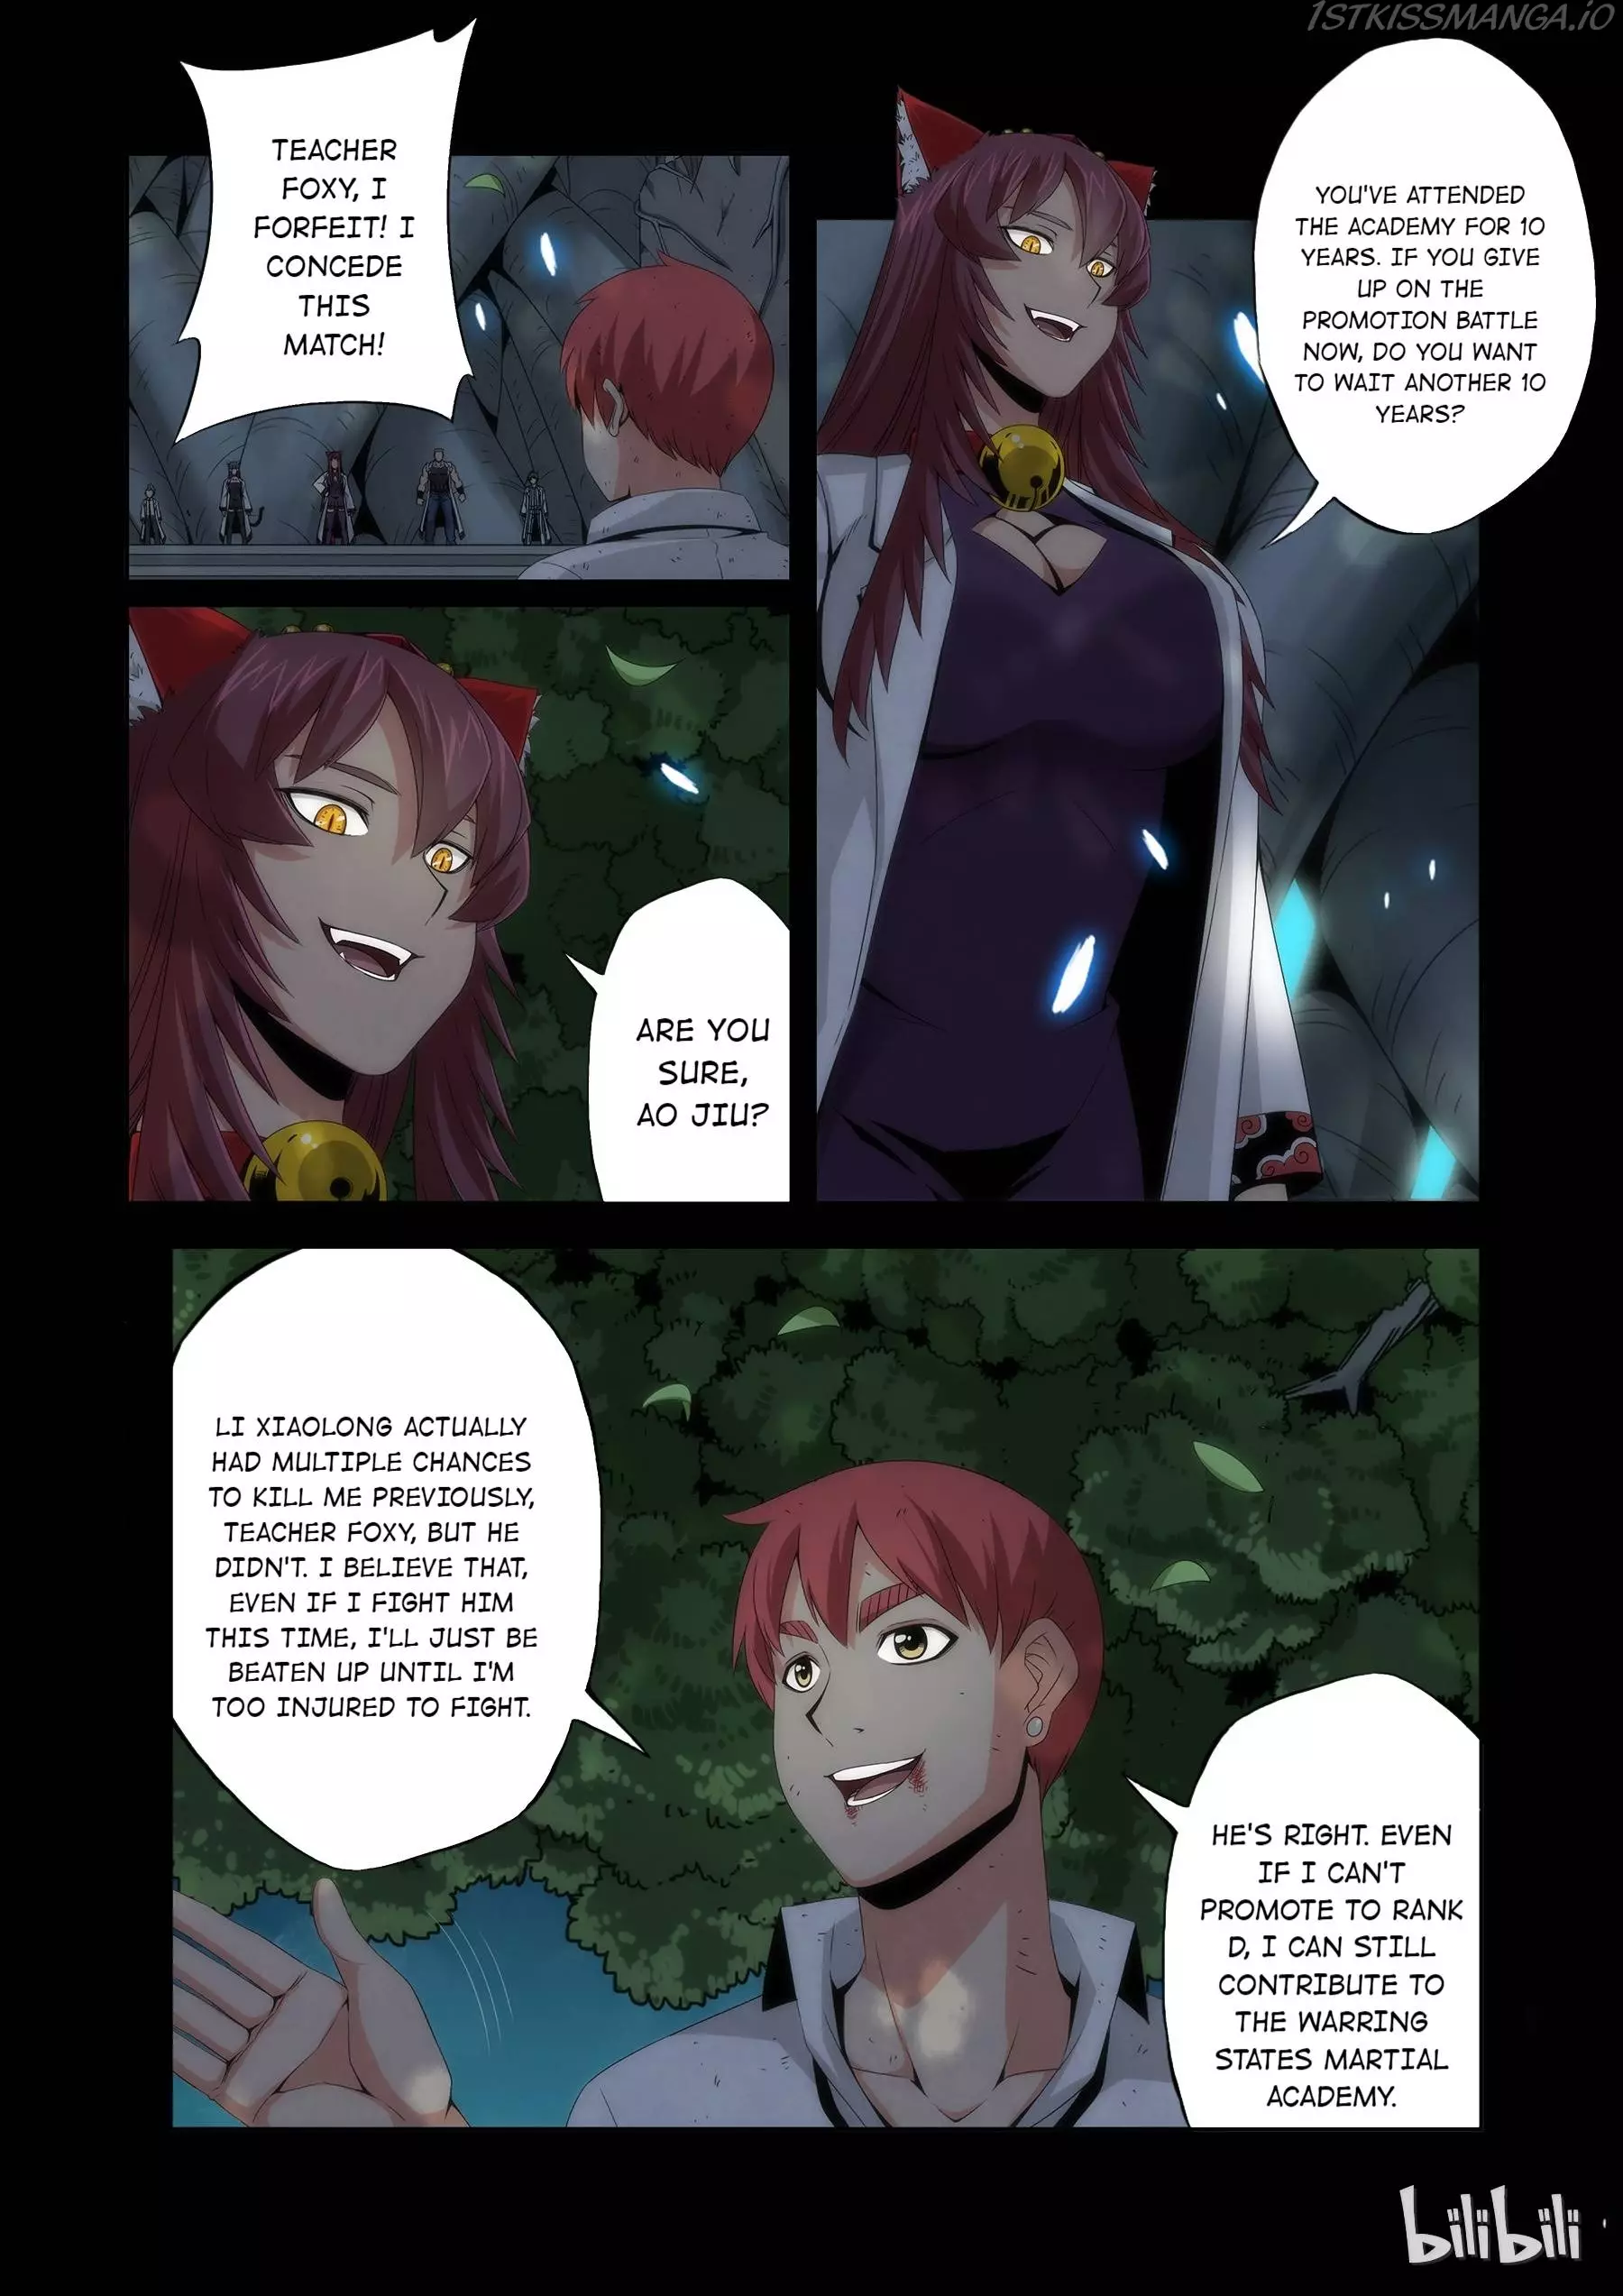 Warring States Martial Academy - 66 page 2